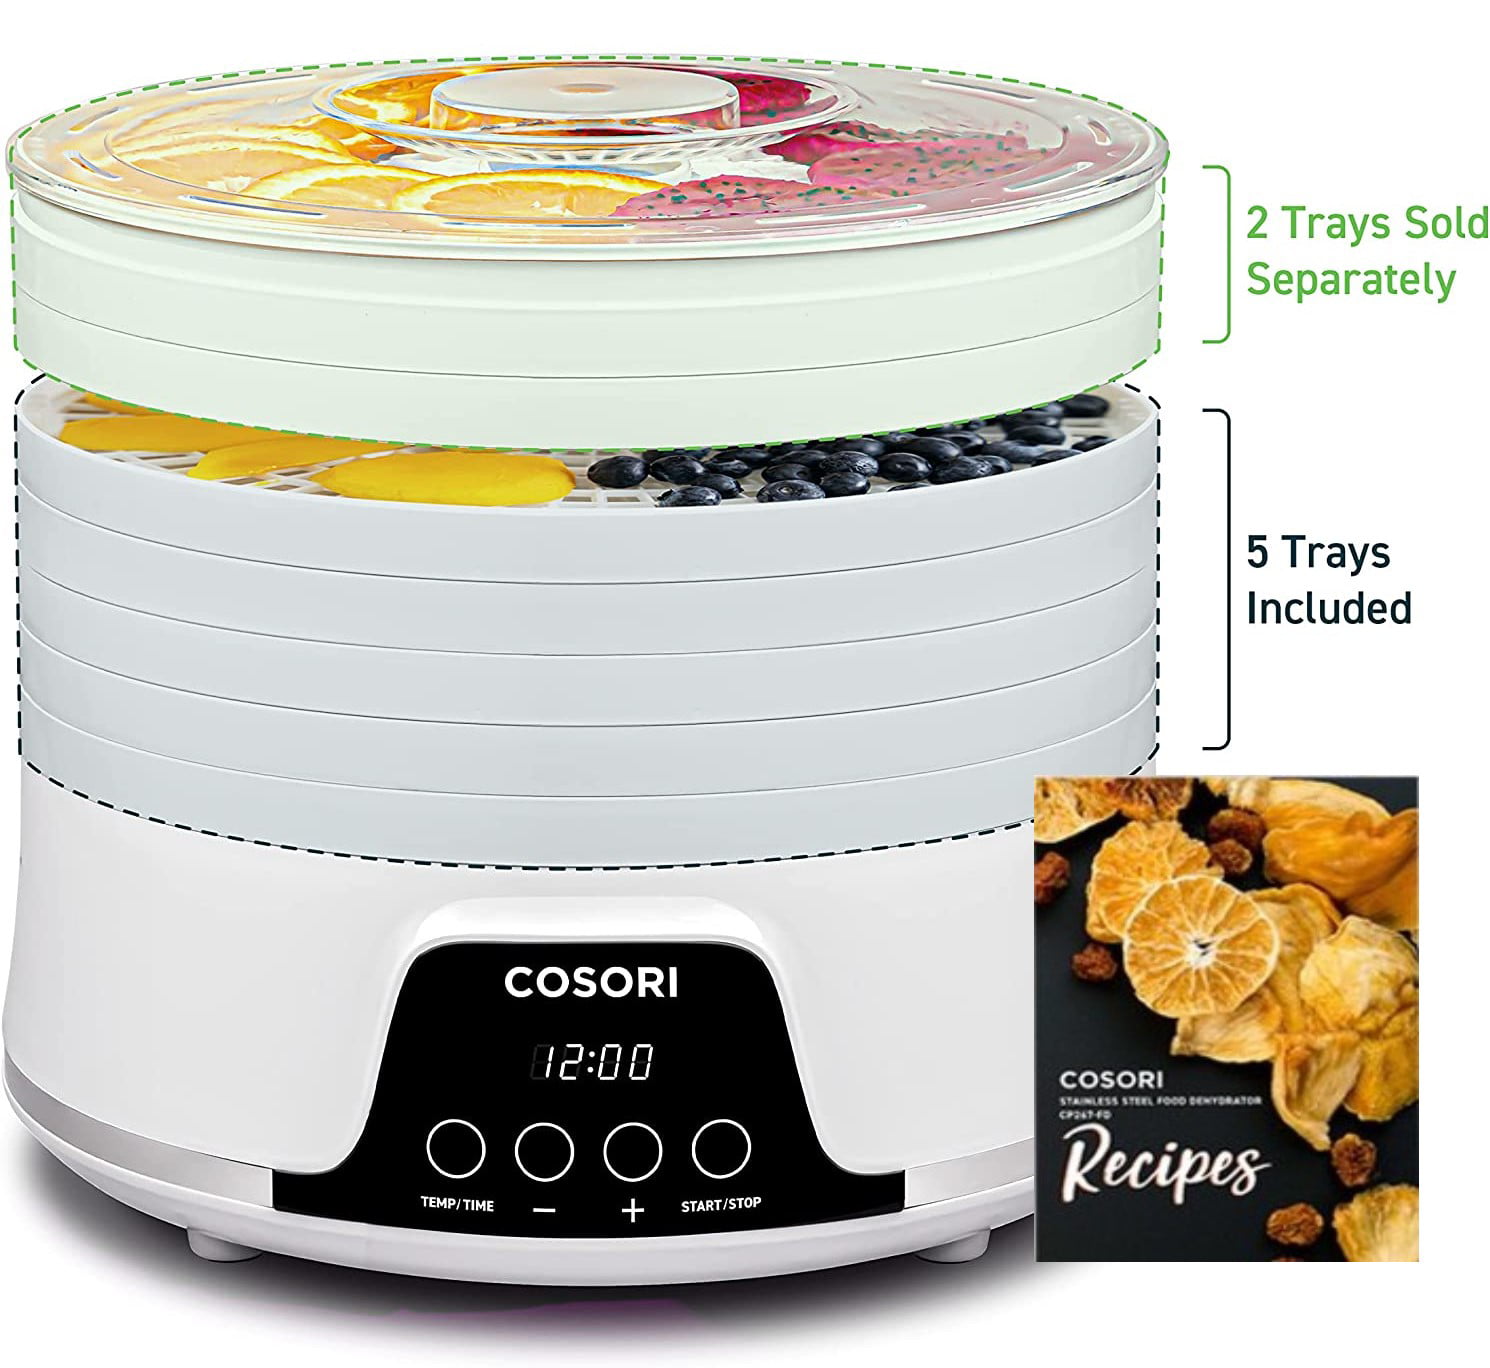 COSORI Food Dehydrator (50 Recipes) for Jerky, Vegetables Fruit